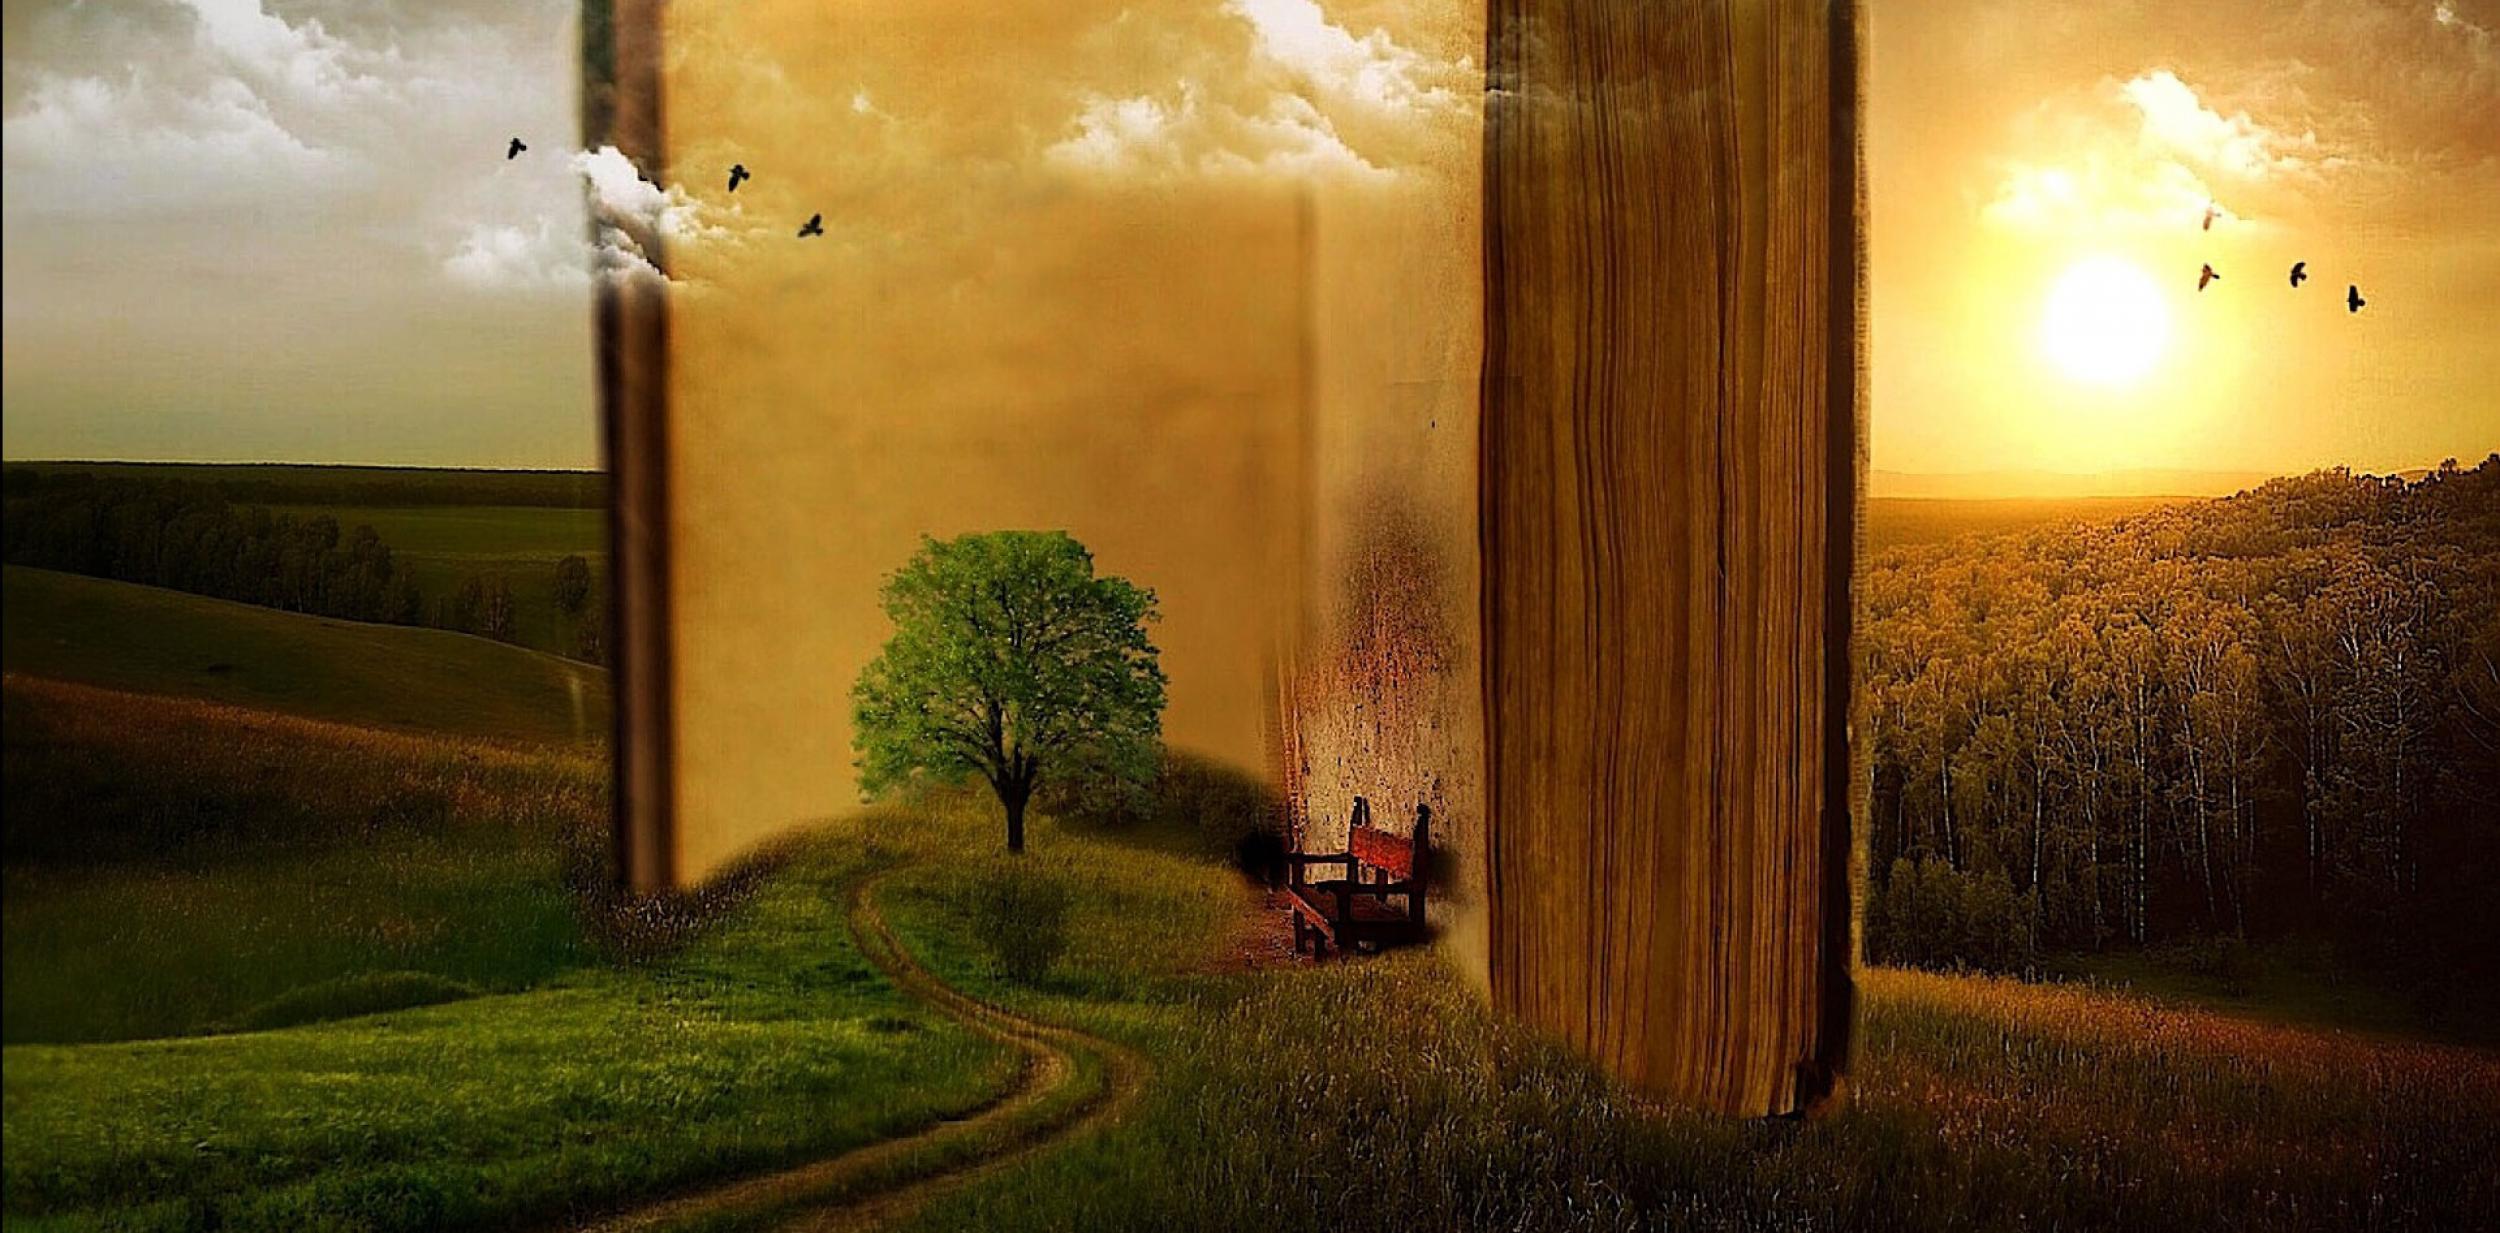 Surreal image of a giant open book in a green field.